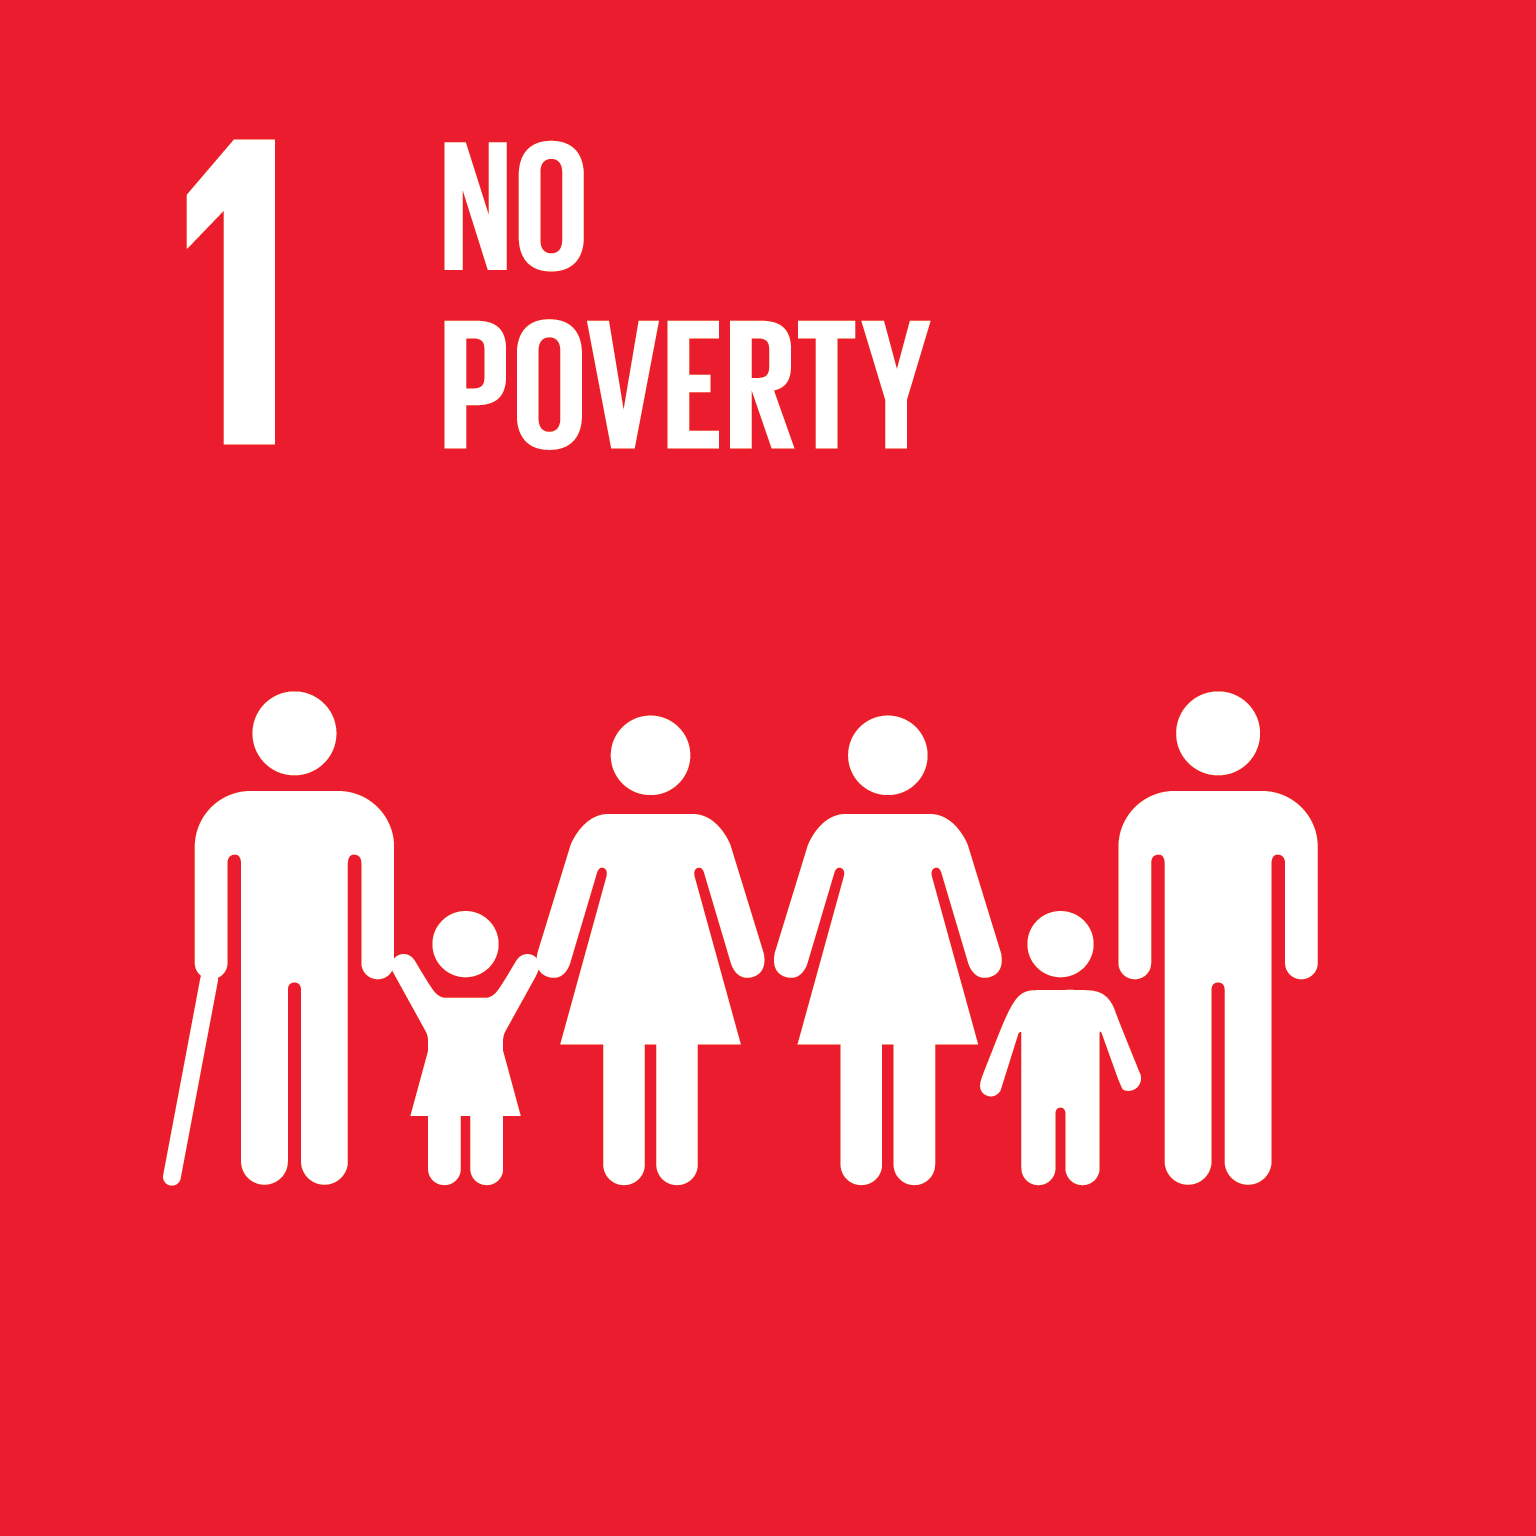 Sustainable Development Goals Book Club African Chapter Inaugural Book Picks - SDG 1 - No Poverty
